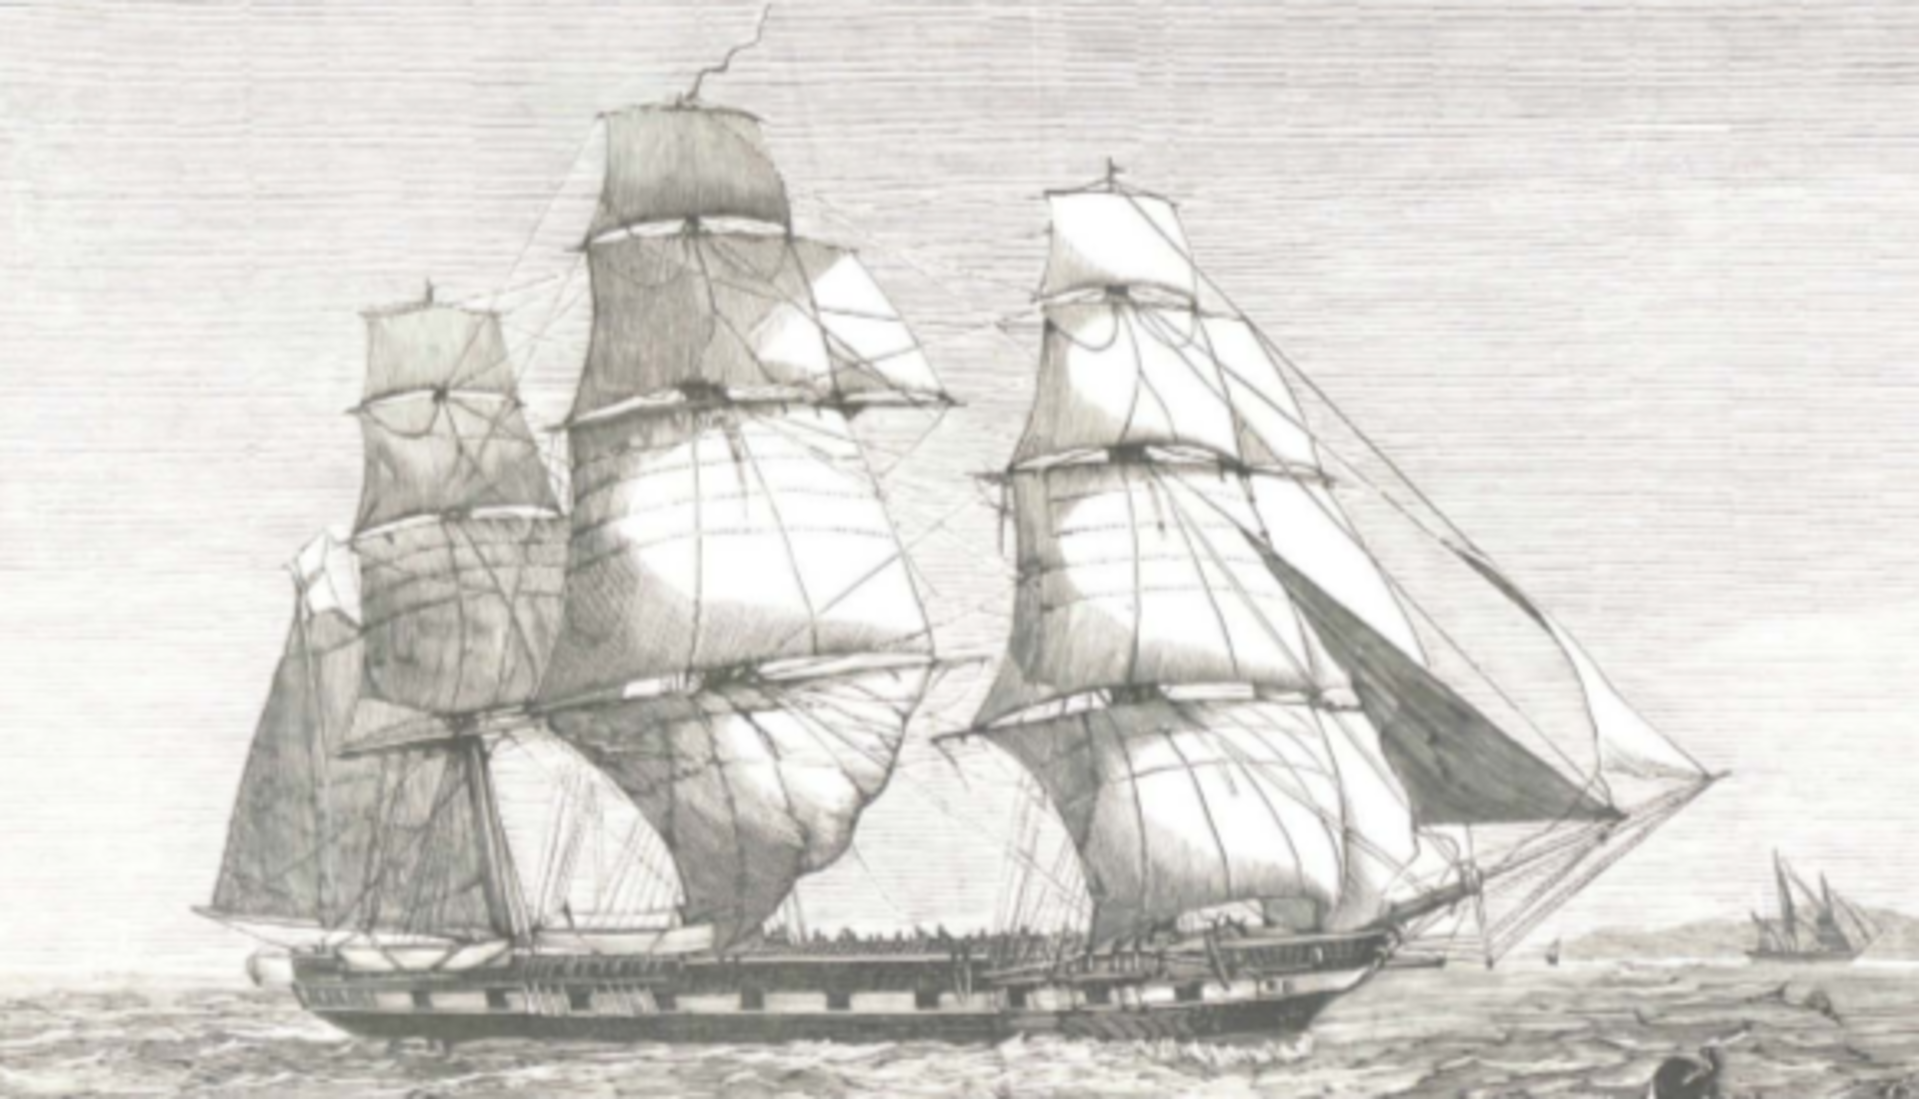 <p>The first big incident that is usually mentioned is the disappearance of the Atalanta ship. It disappeared with her entire crew after setting sail from the Royal Naval Dockyard, Bermuda on January 31, 1880.</p> <p>By La Ilustracion Espanola y Americana, April 30, 1880 - http://www.cervantesvirtual.com/descargaPdf/la-ilustracion-espanola-y-americana--770/, Public Domain, https://commons.wikimedia. org/w/index.php?curid=62595717</p>